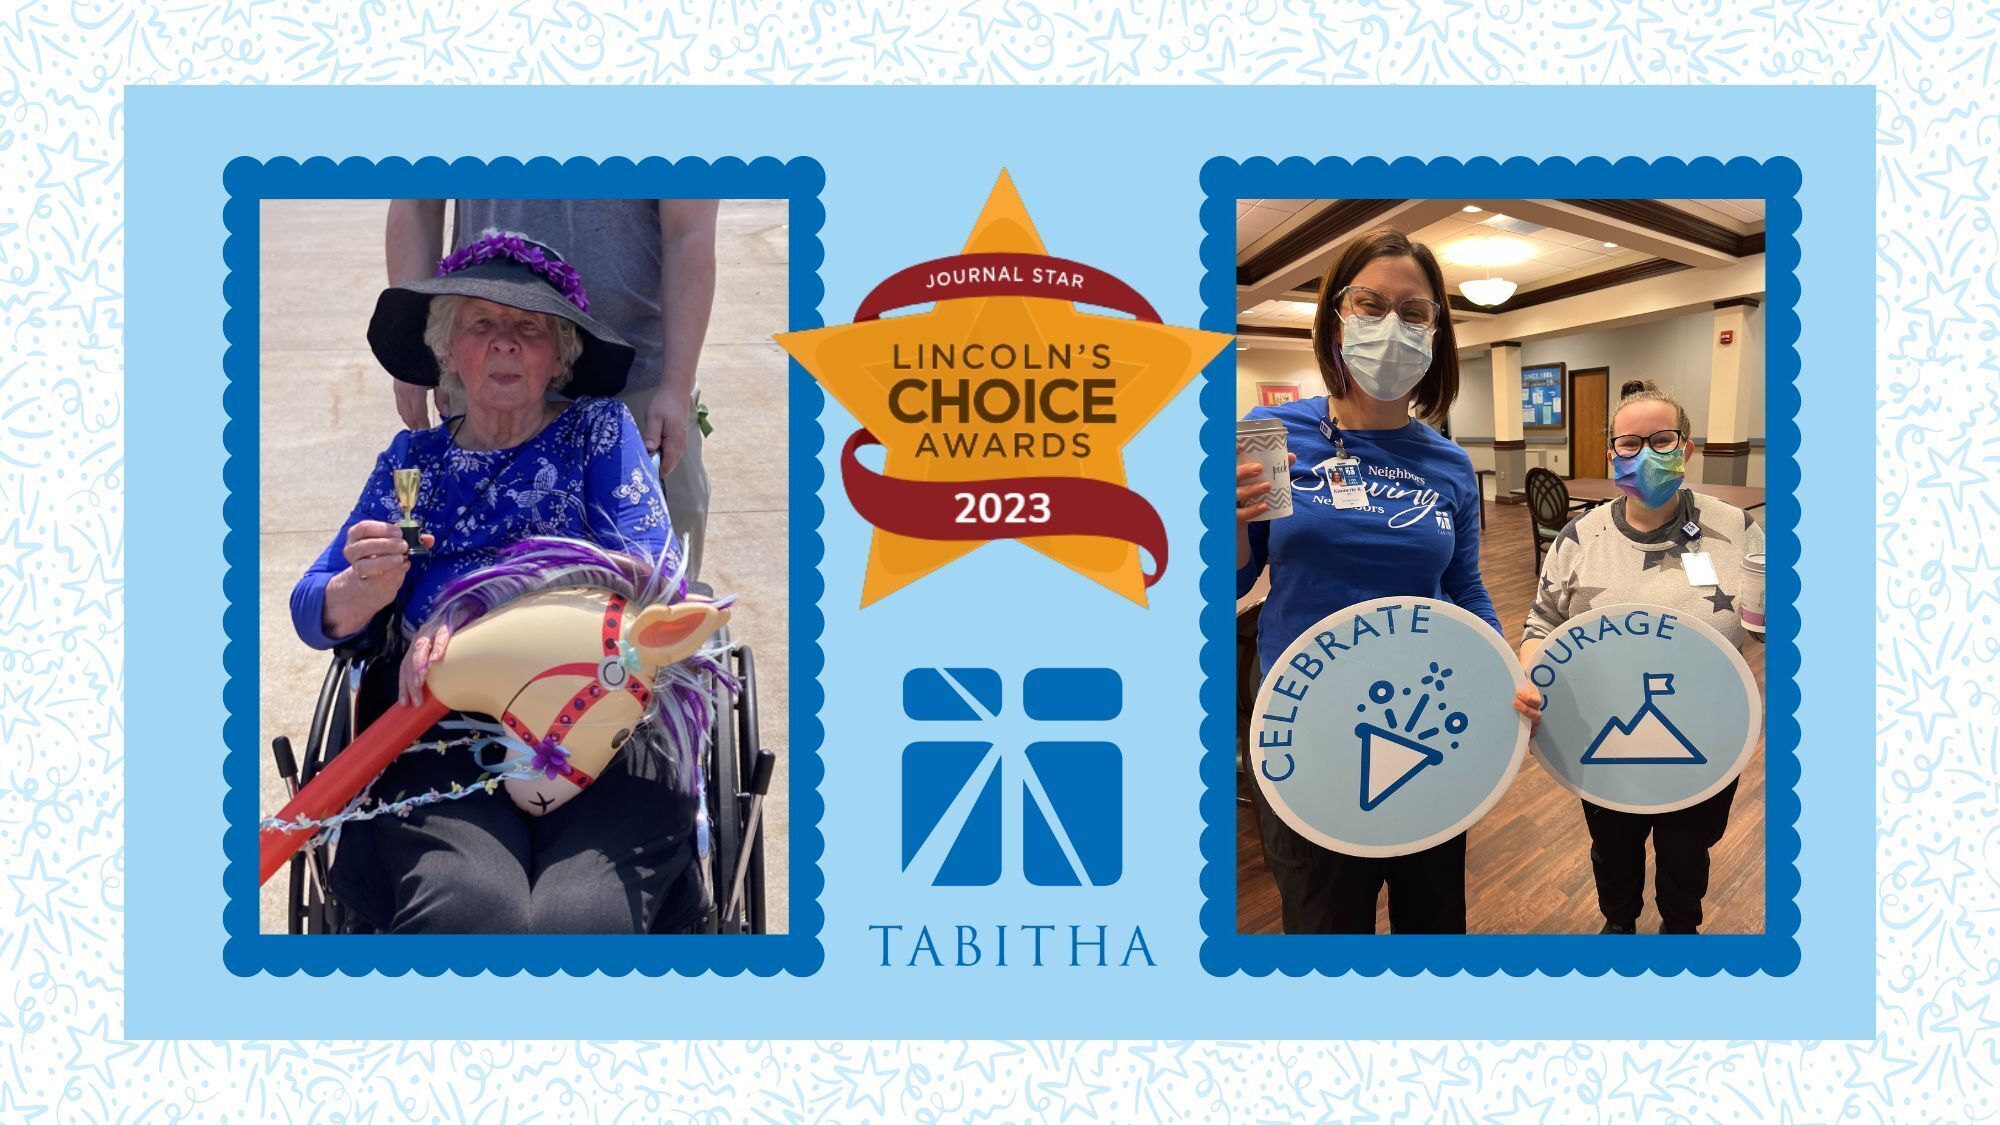 Vote Tabitha Daily for 2023 Lincoln's Choice Awards